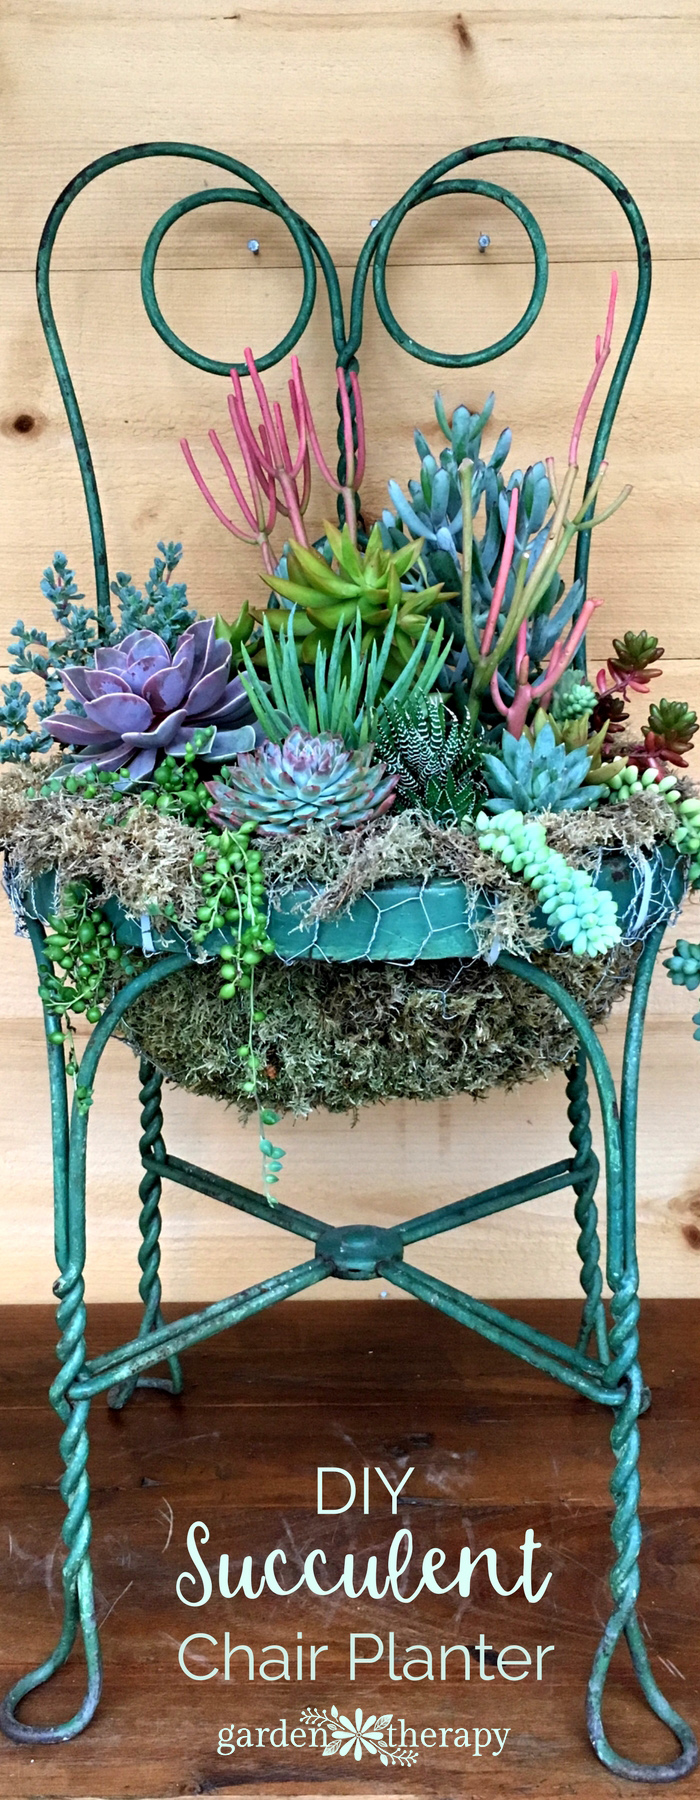 A wire chair with succulents on the seat.